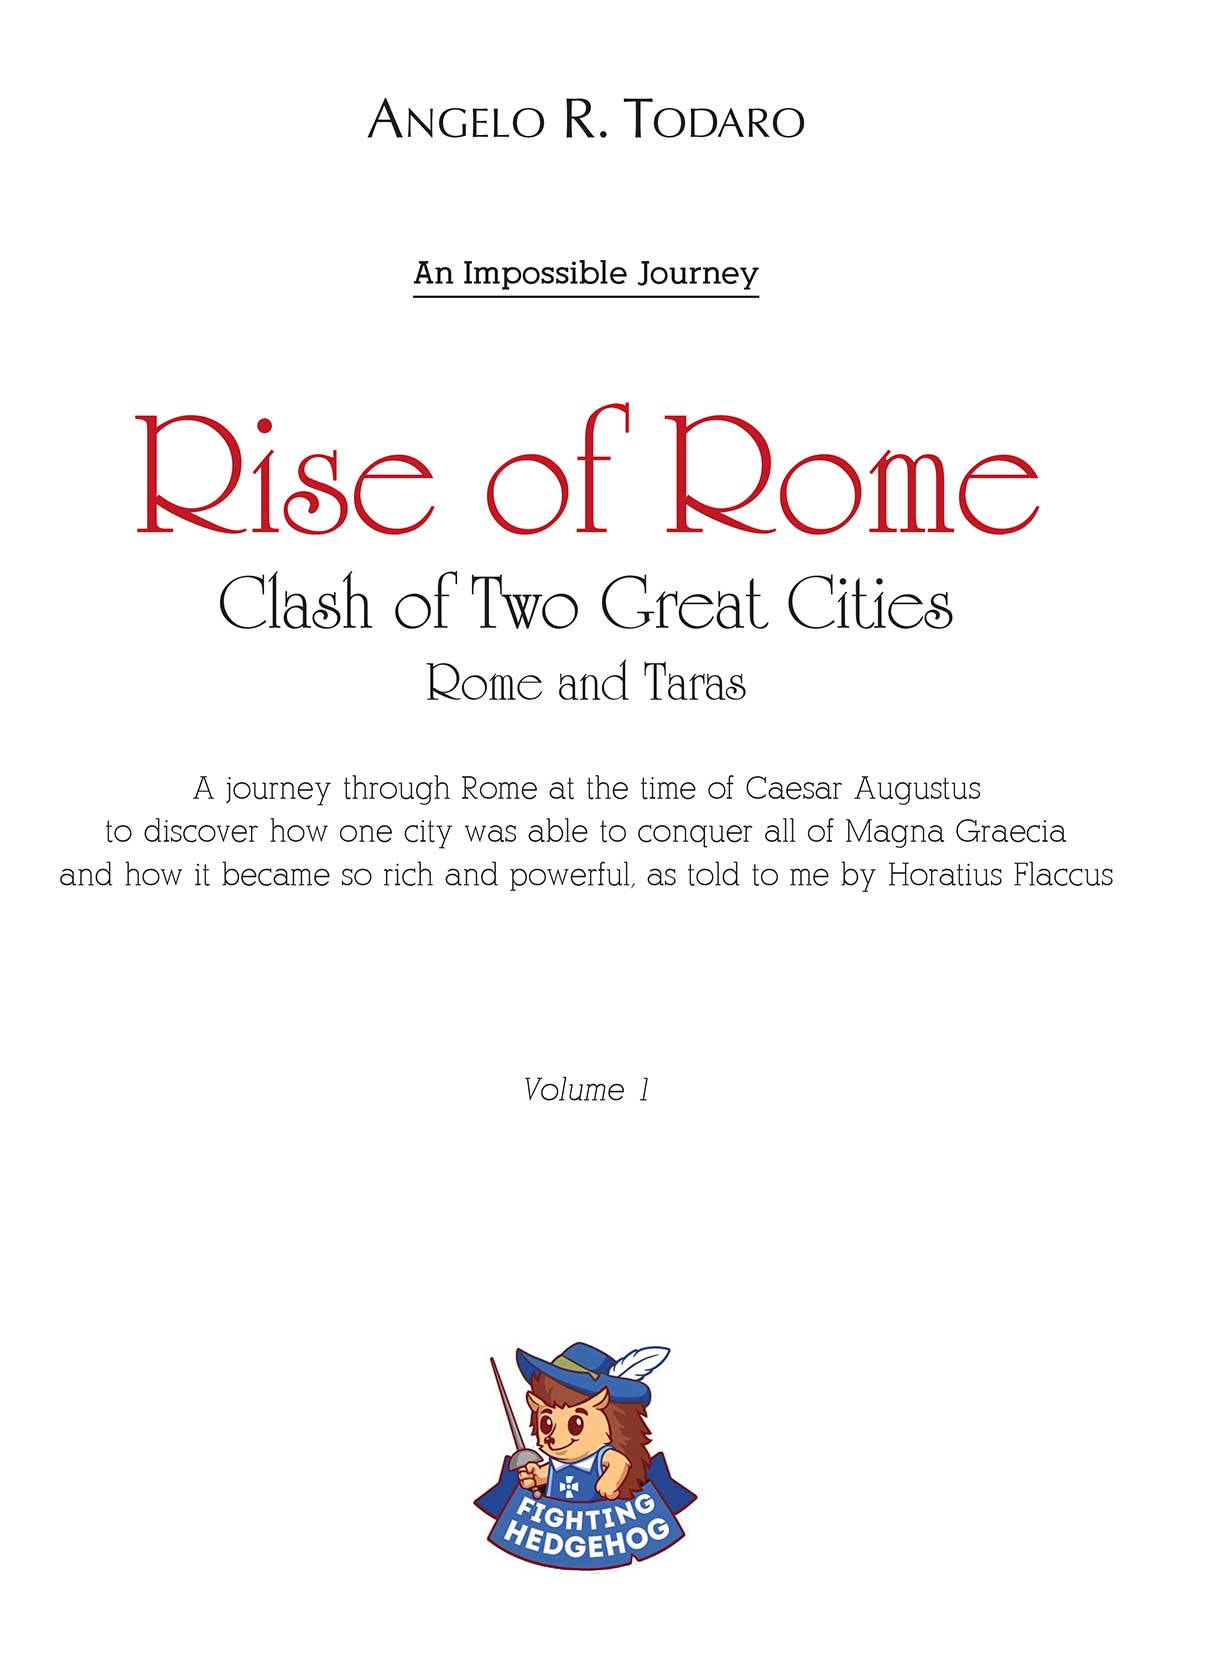 Rise of Rome 003